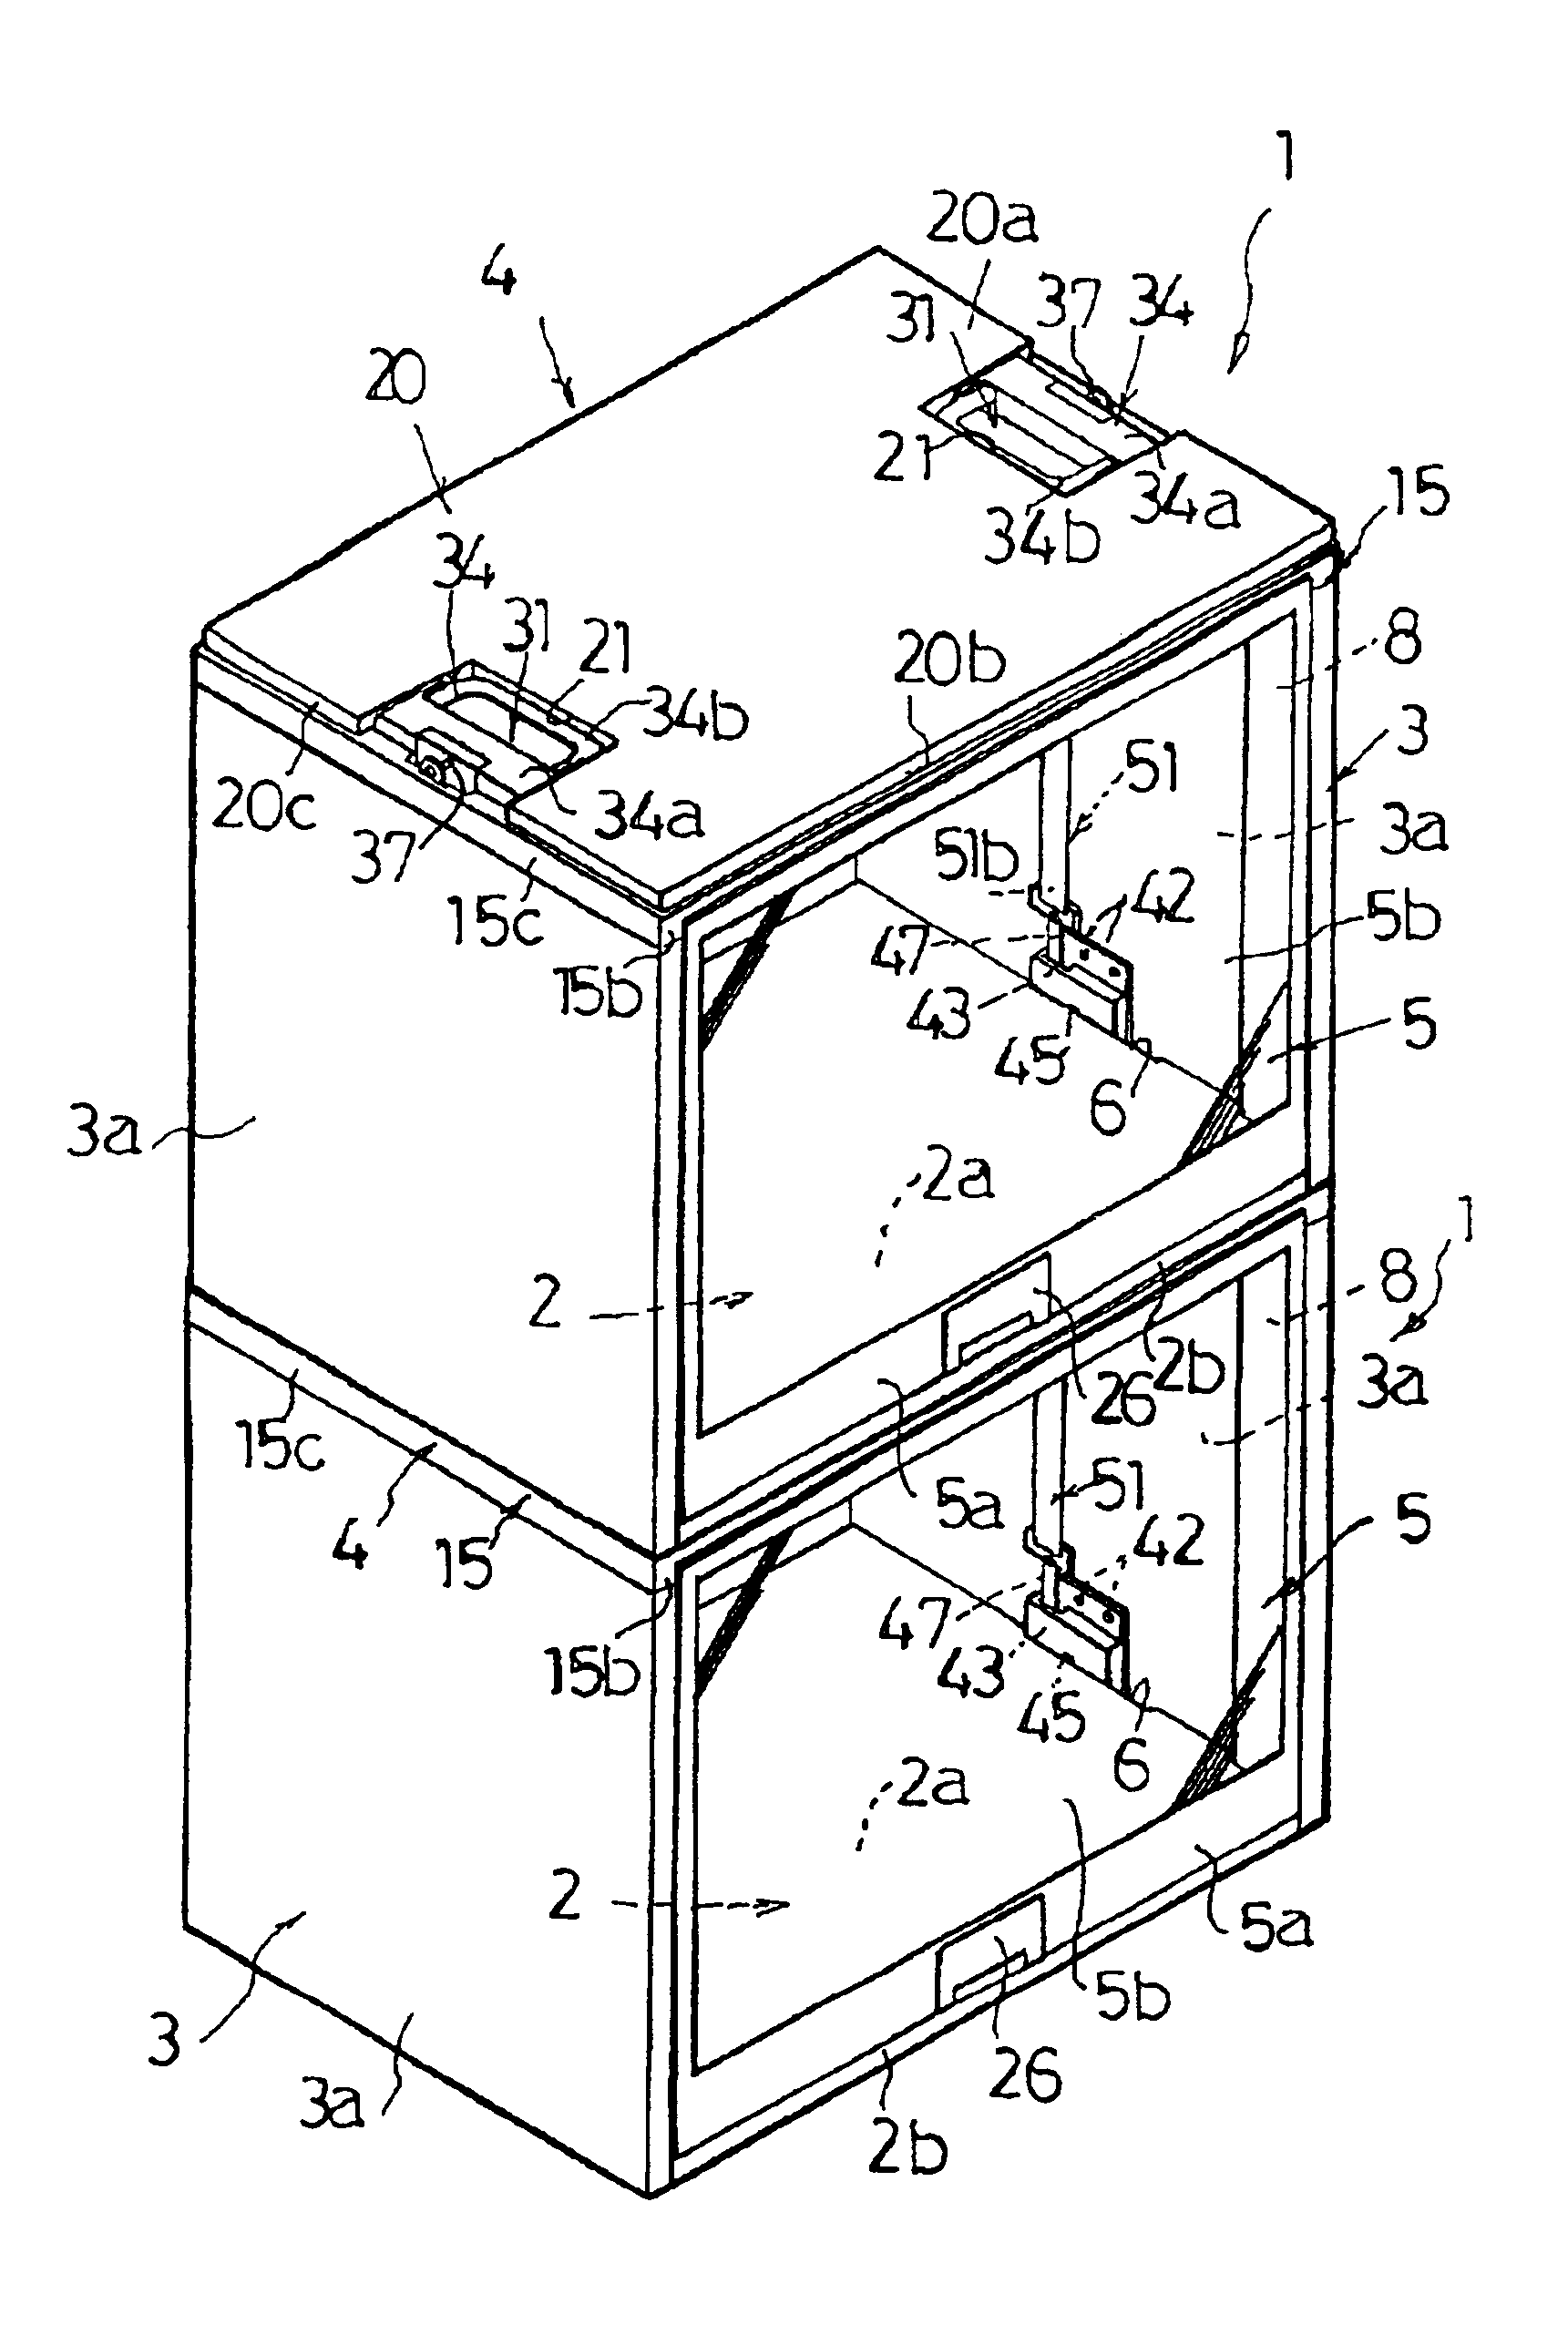 Connection structure of storage compartment